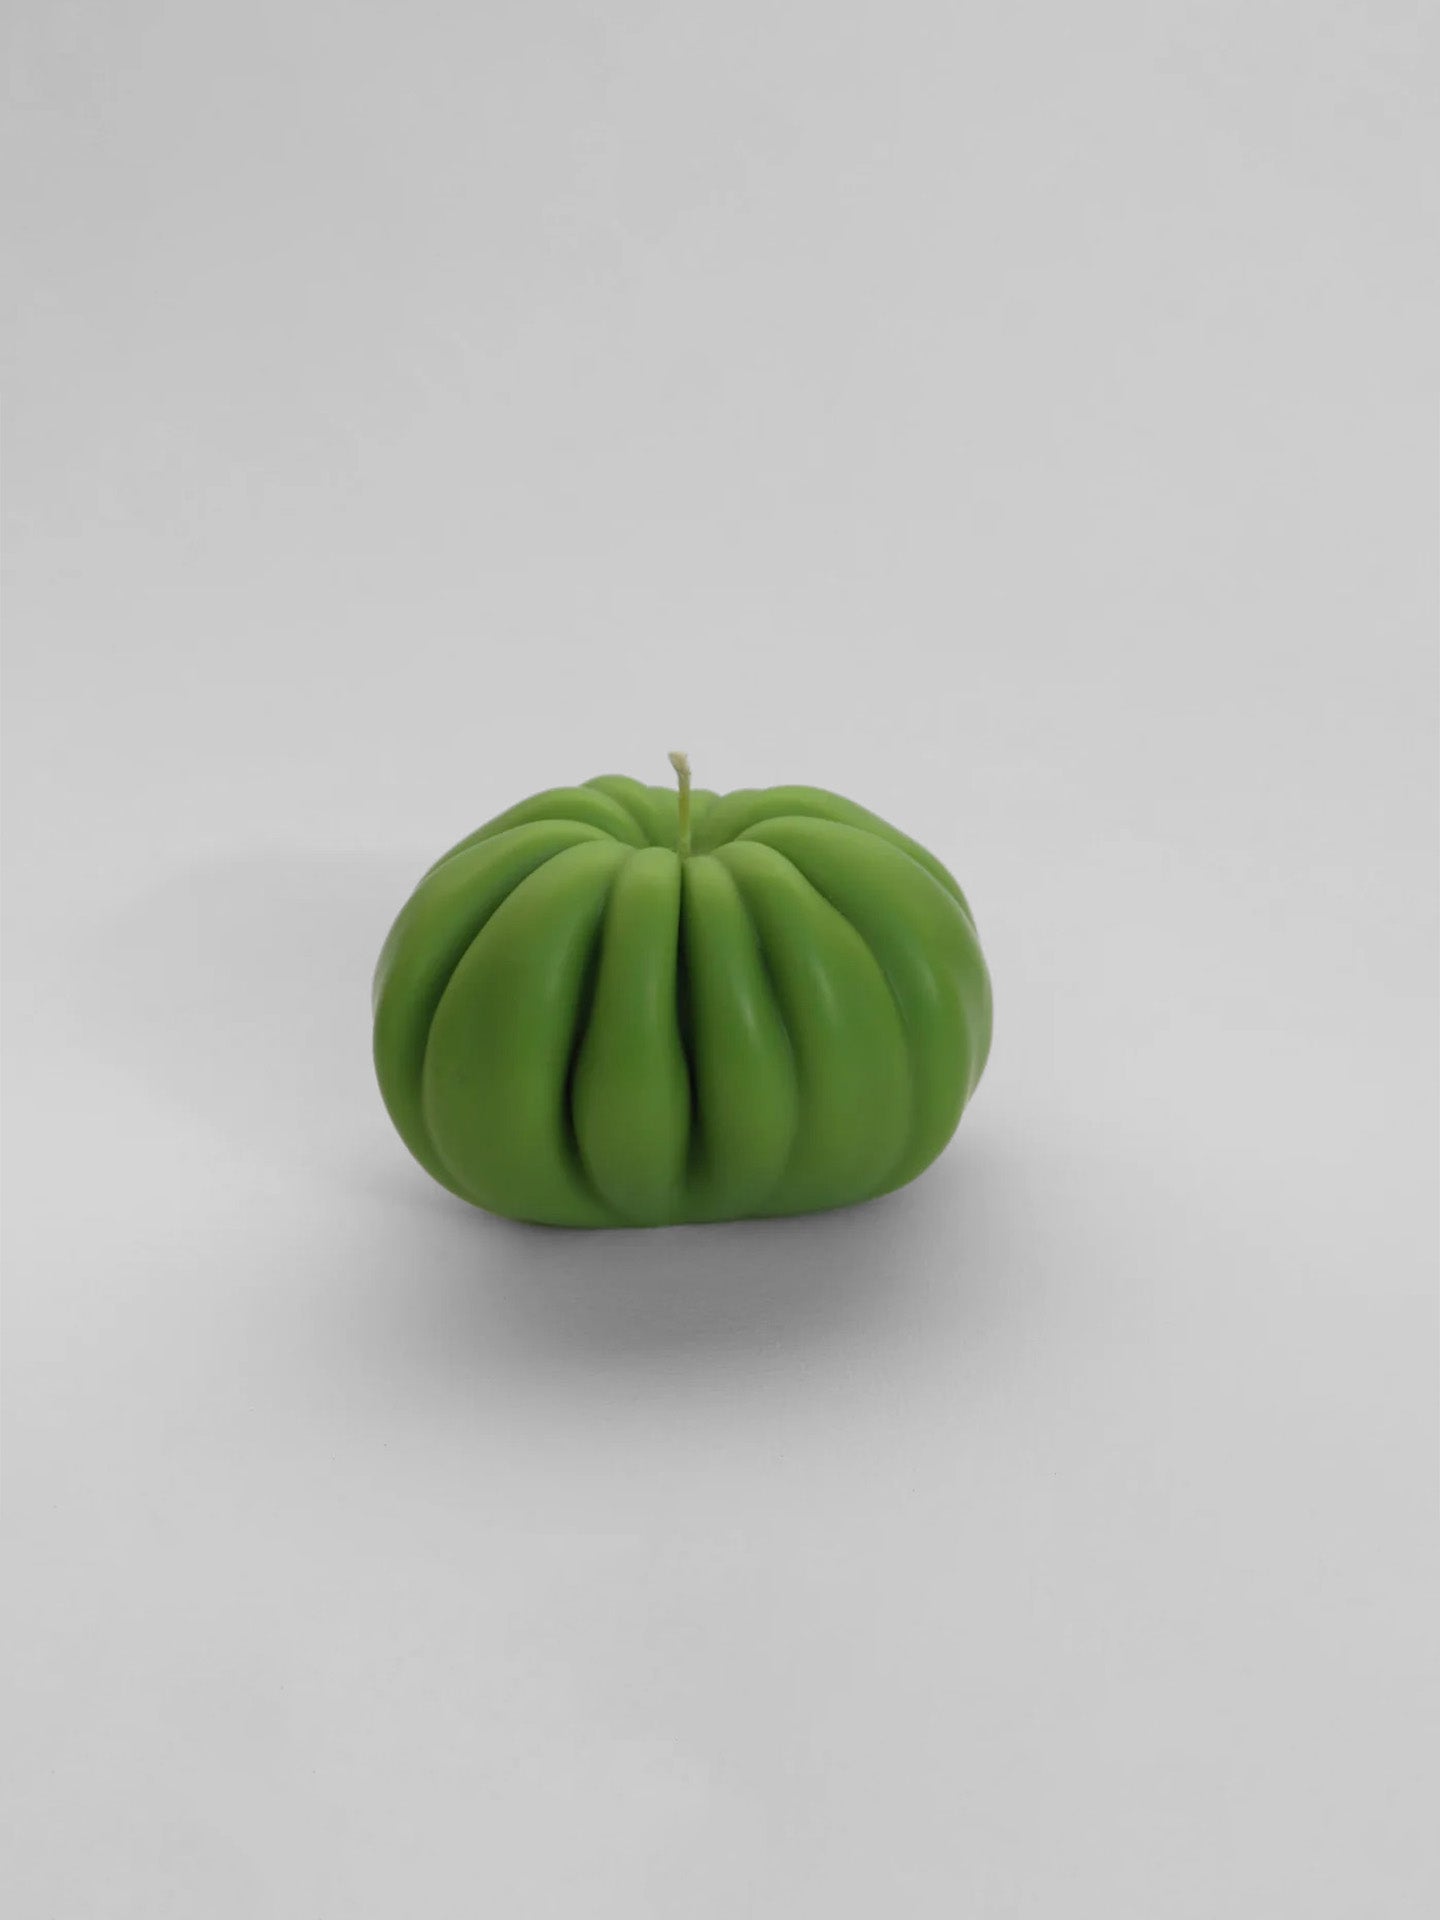 A Green Heirloom Tomato Candle – Medium by Nonna's Grocer on a white background.